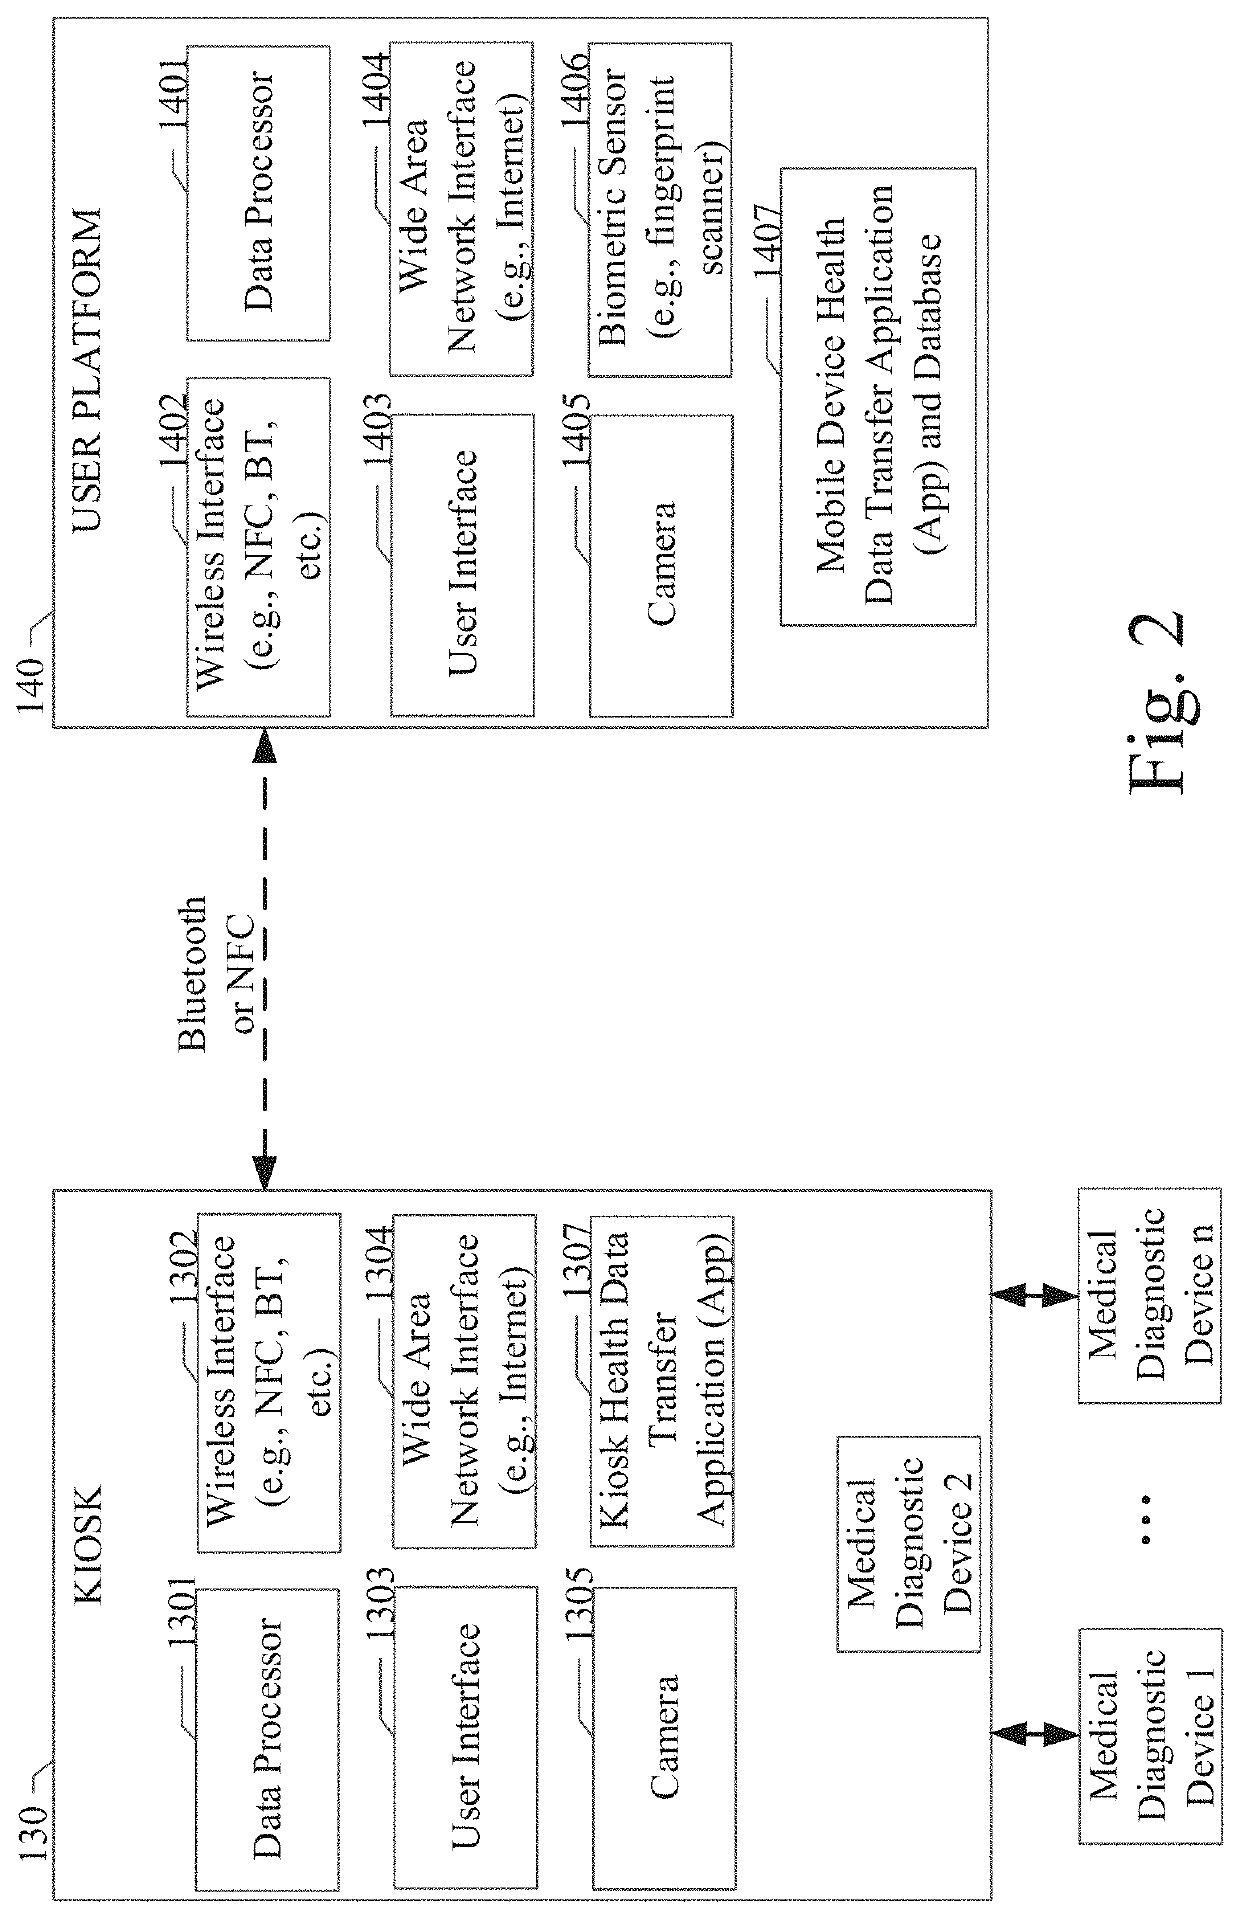 System and method to enable a kiosk to aggregate wireless devices and report health information to a mobile consumer device